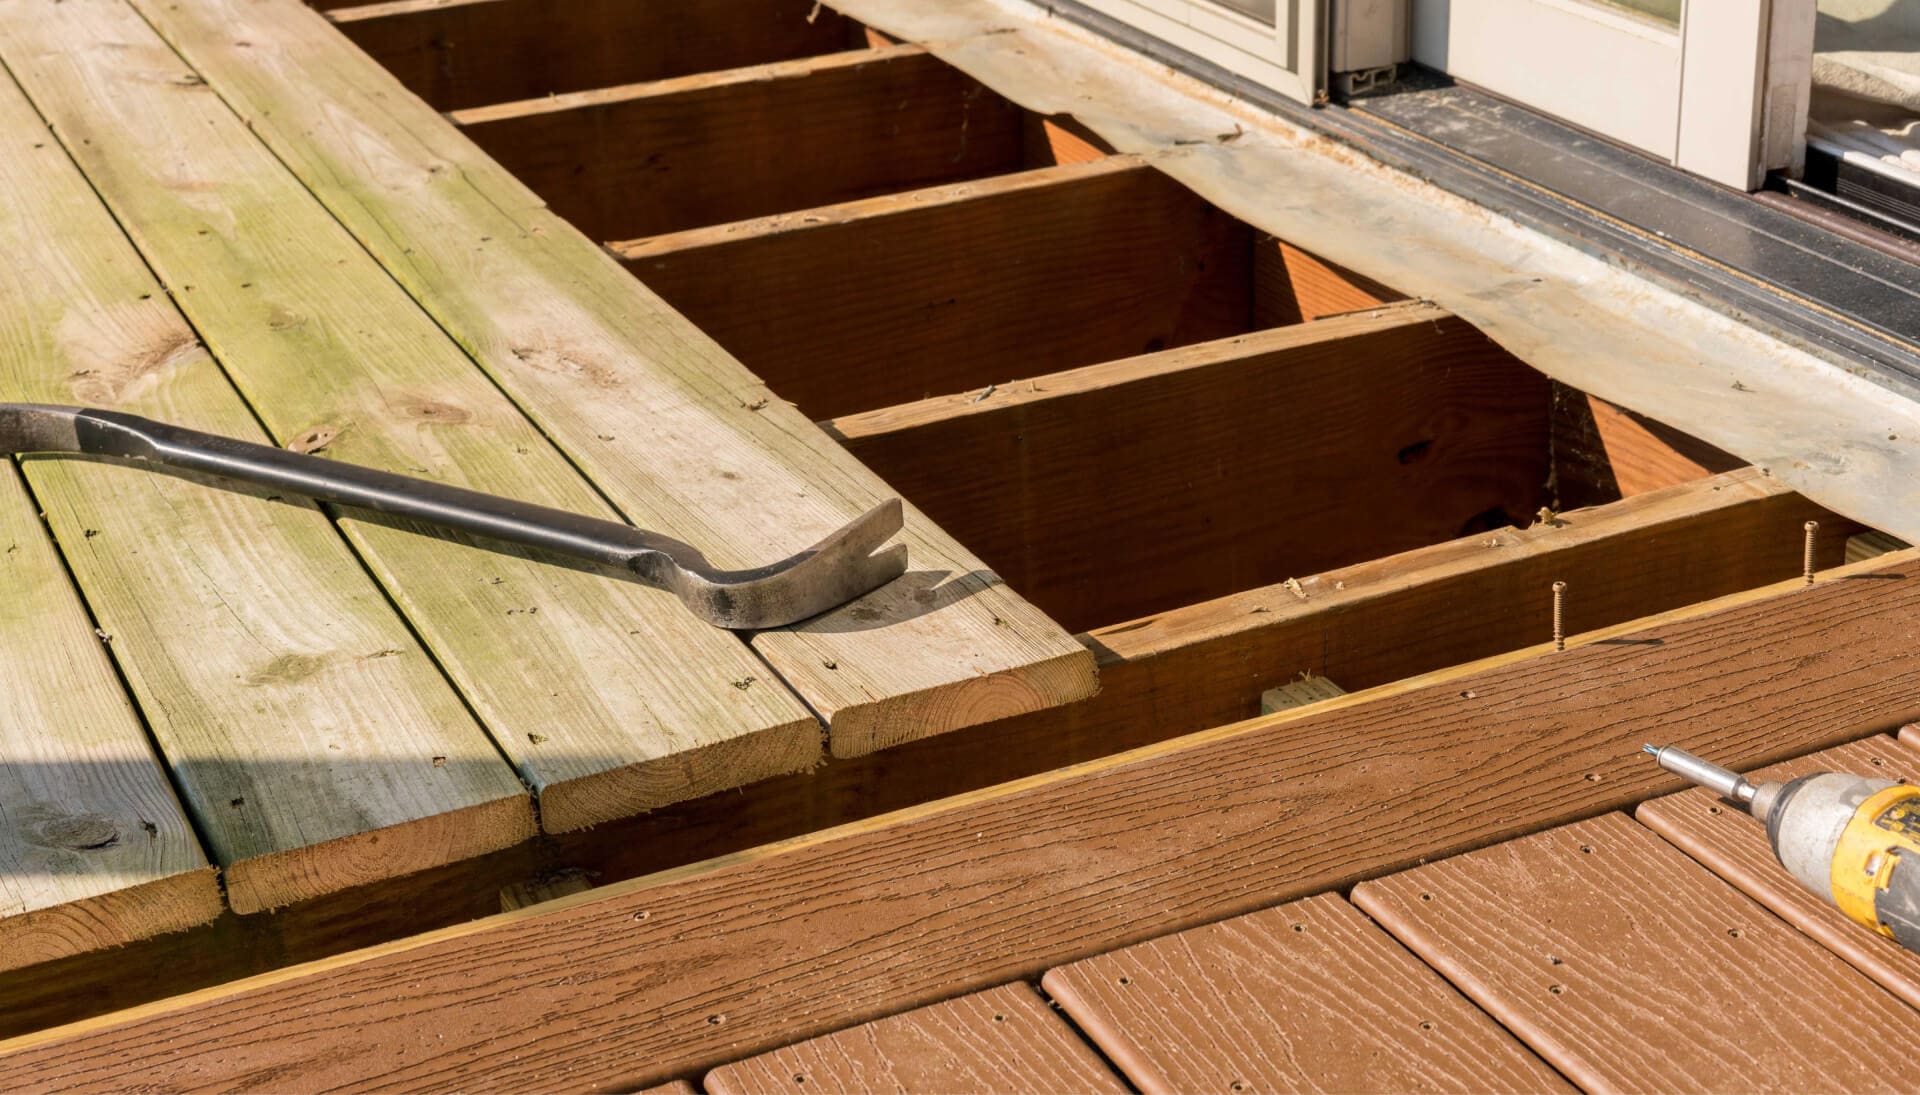 A professional deck repair service in Johnson City, providing thorough inspections and maintenance to ensure the safety and durability of the structure